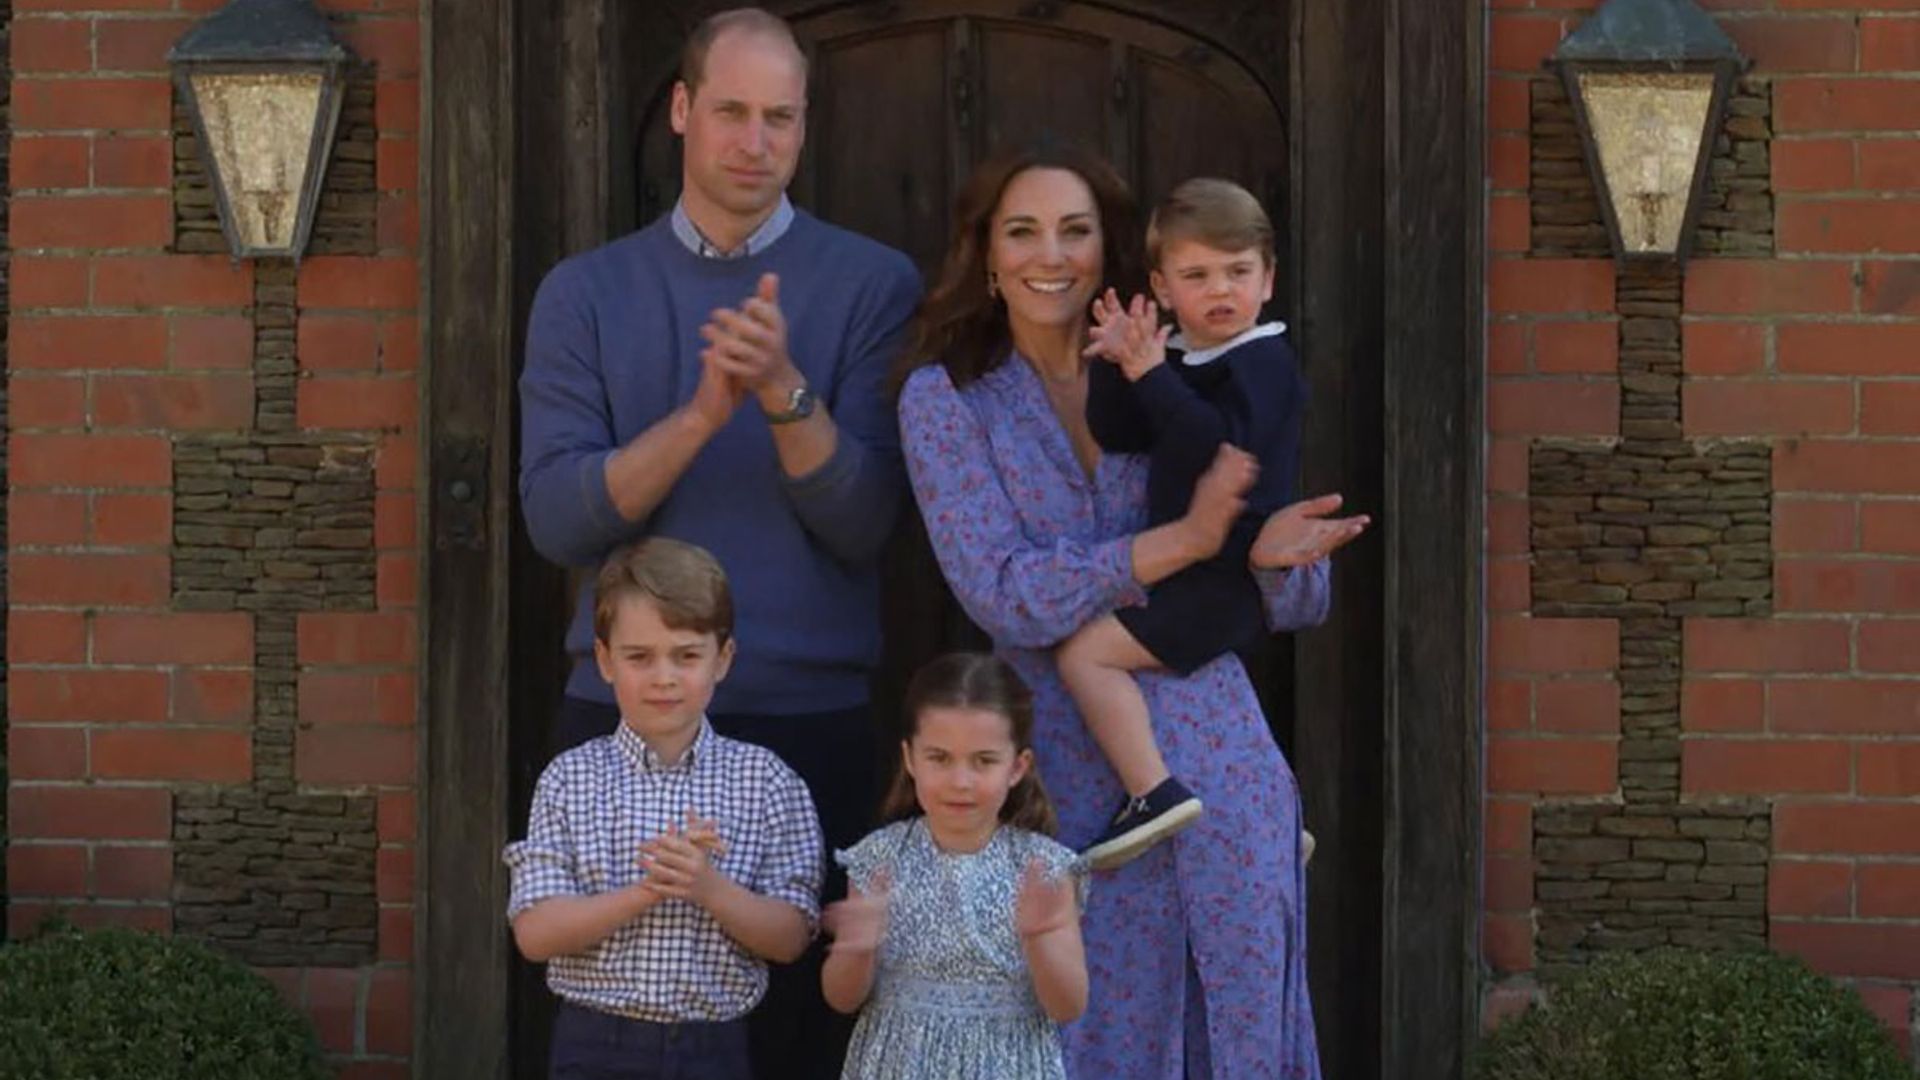 cambridges clapping